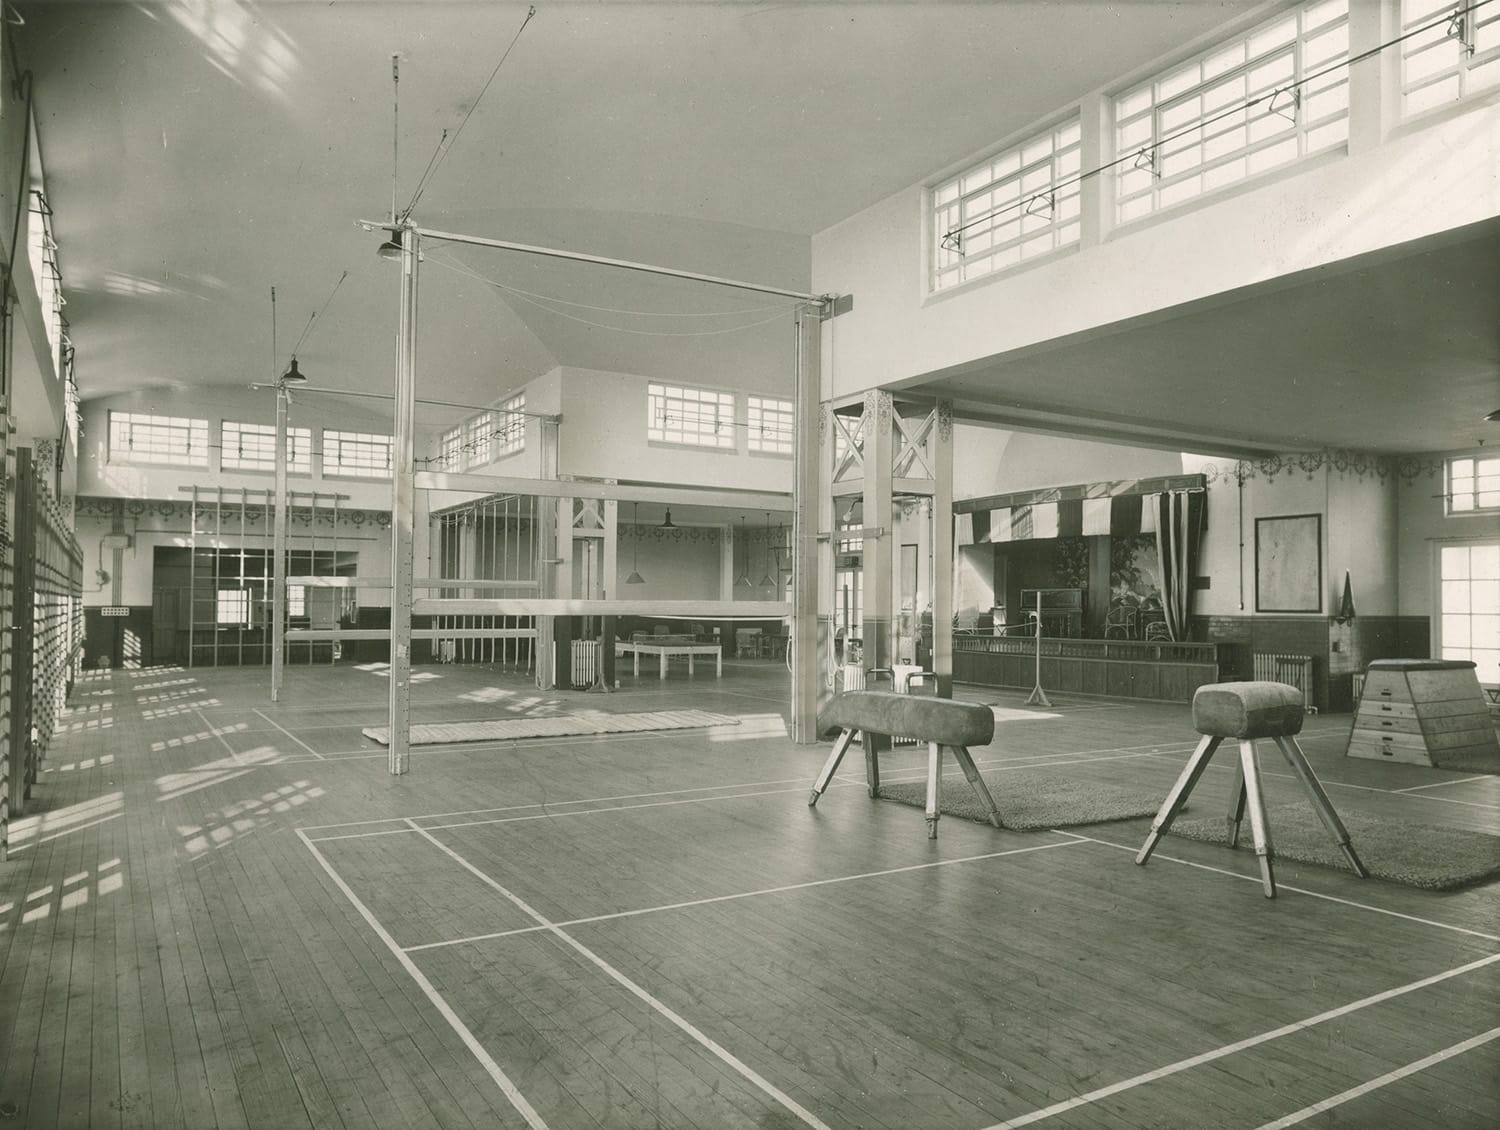 A black and white photo of an interior hall with gymnasium equipment including balance beams and horses